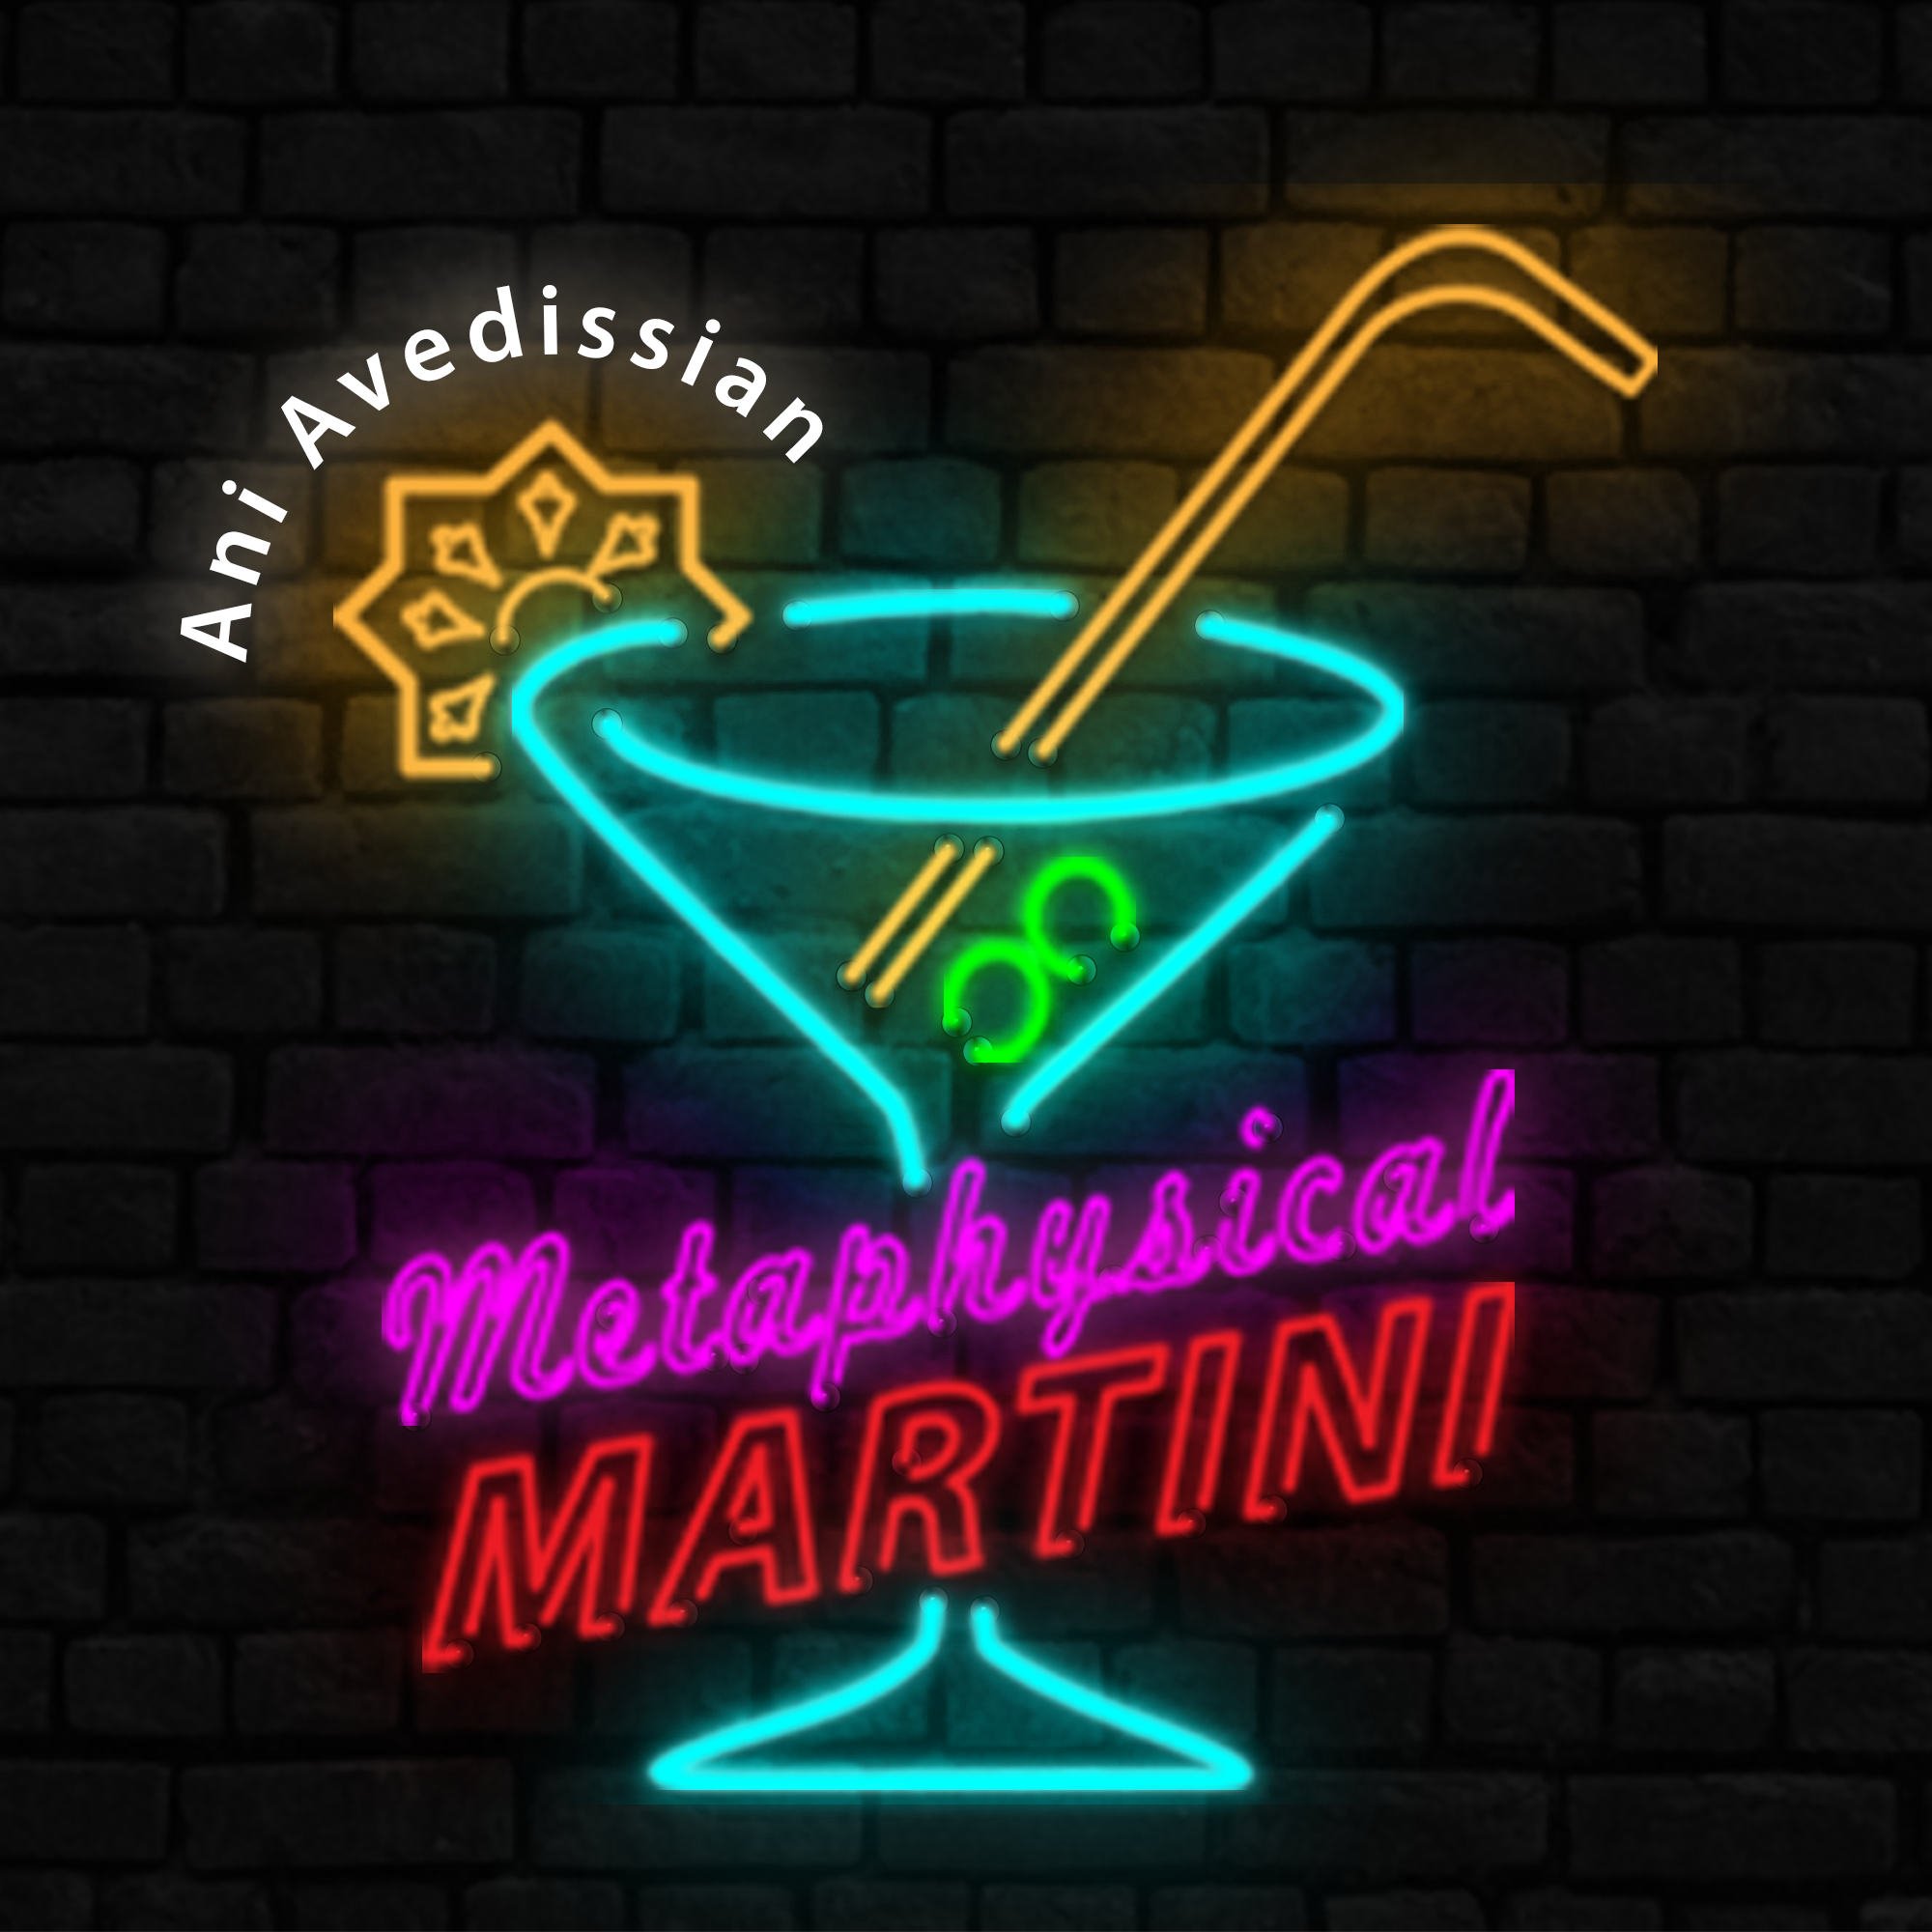 "Metaphysical Martini"  08/05/2020  To live in fear and falsehood is worse than death - Zend Avesta